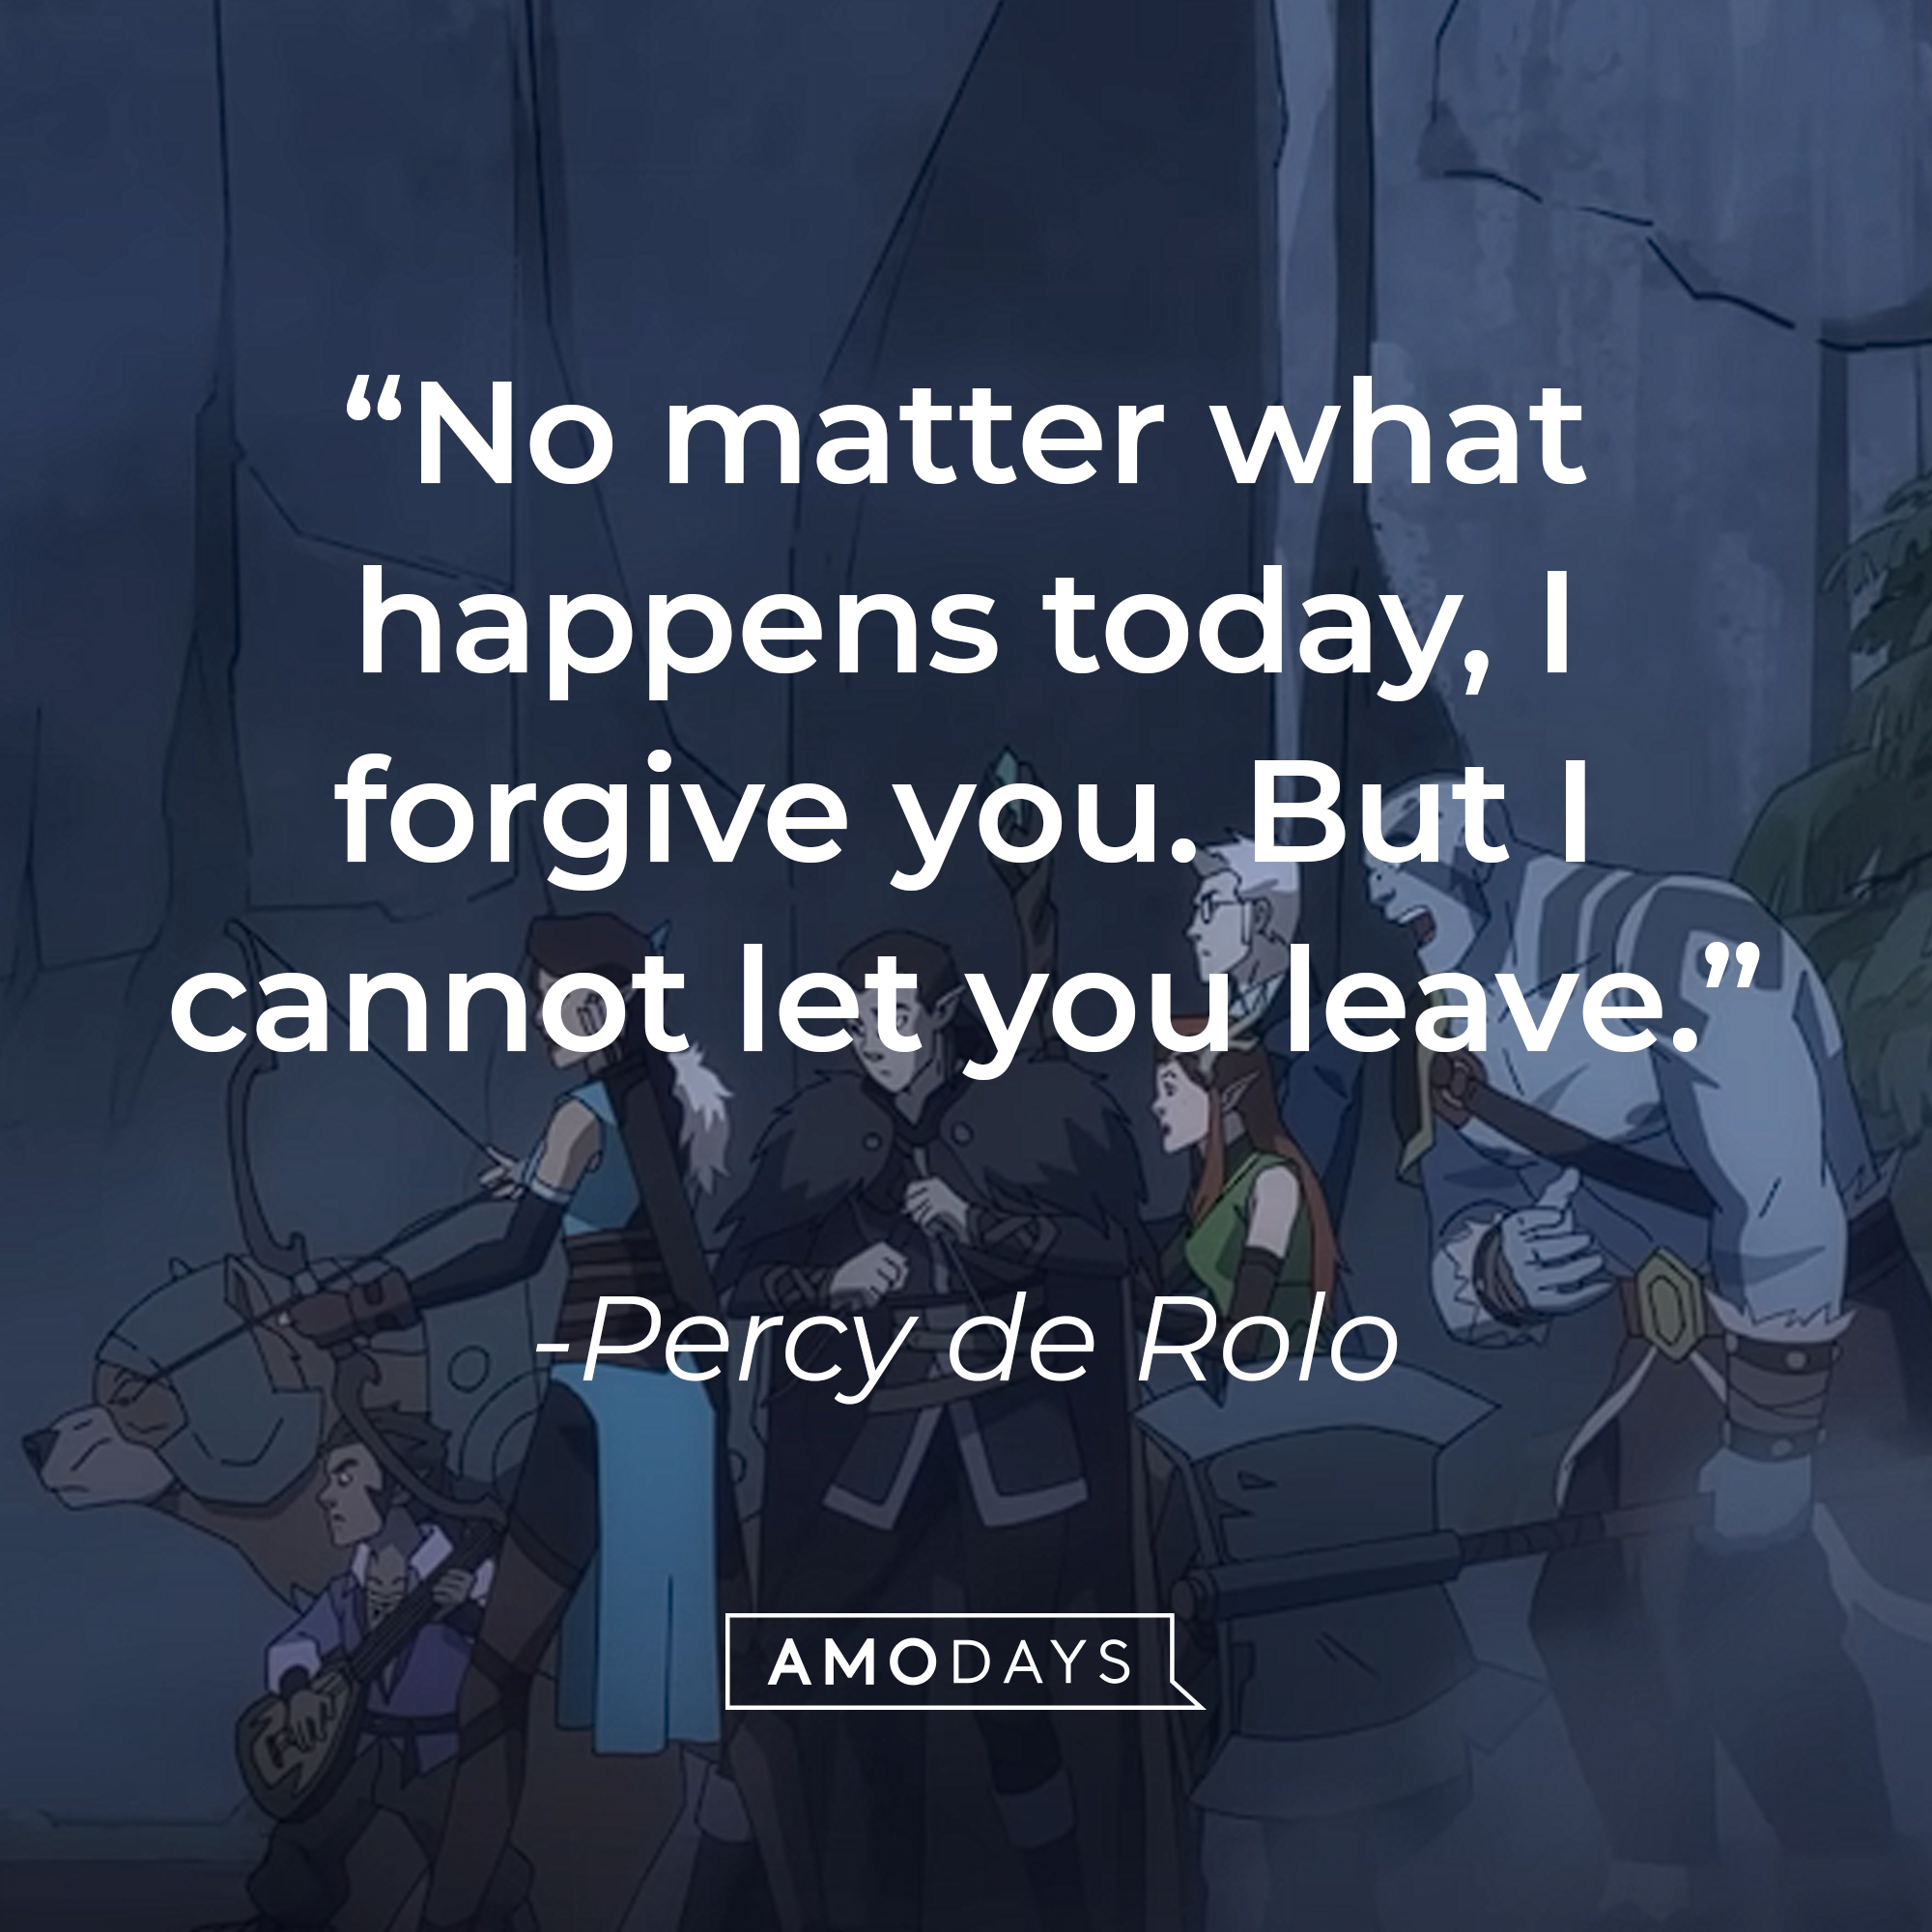 An image of Percy de Rolo with his  quote:  “No matter what happens today, I forgive you. But I cannot let you leave.” | Source: youtube.com/PrimeVideo